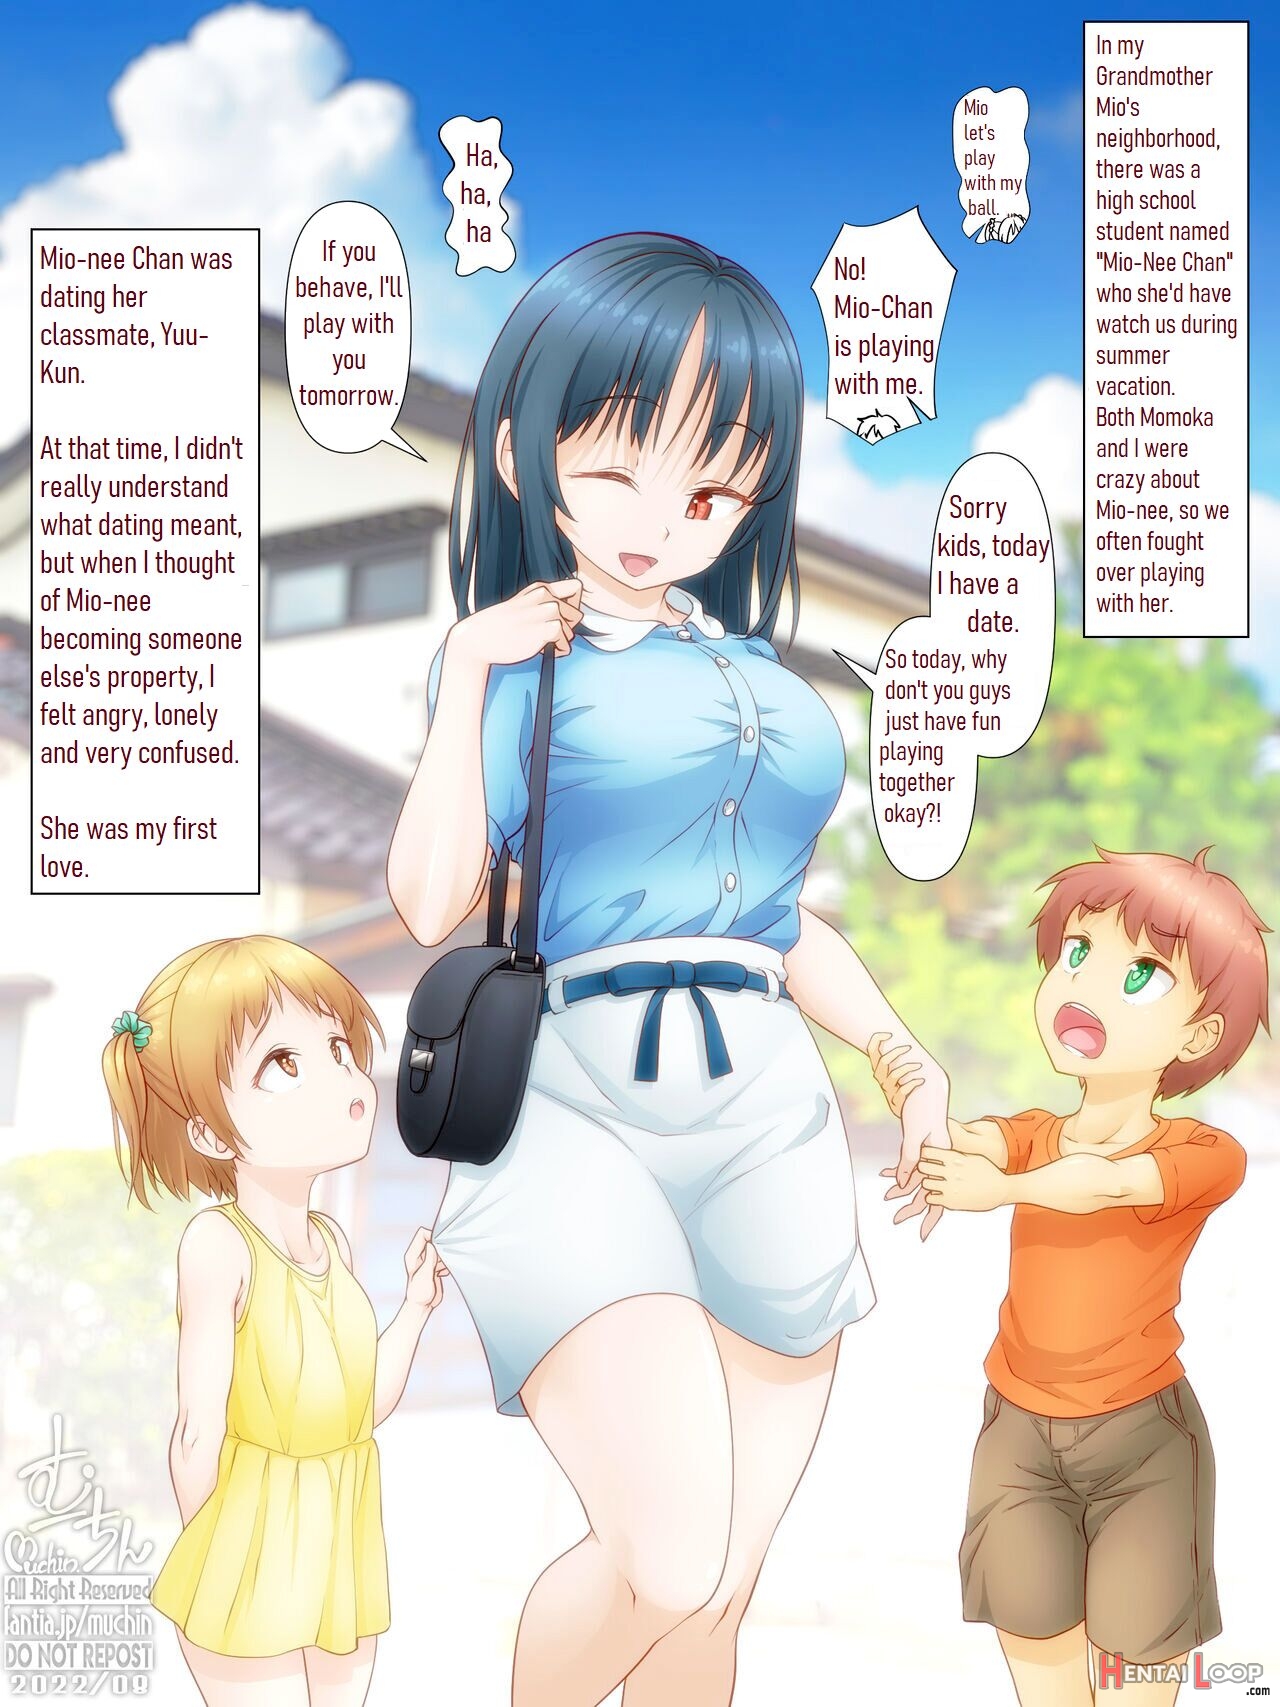 My Summer Holidays 2 (by Muchin) - Hentai doujinshi for free at HentaiLoop